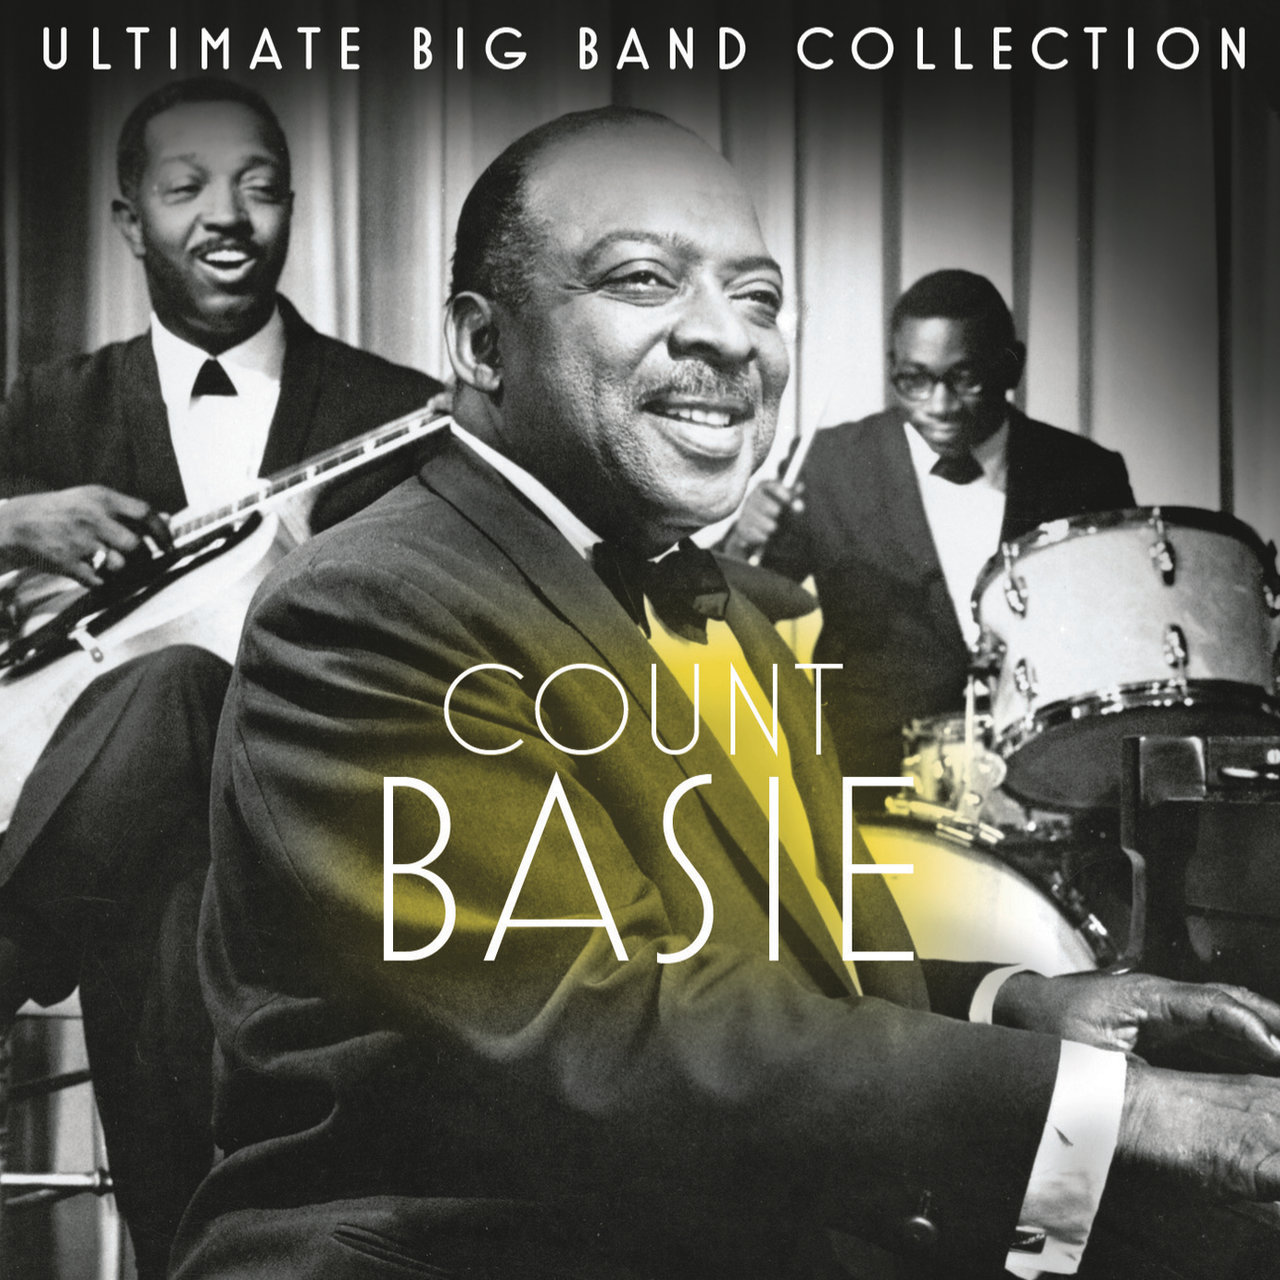 Ultimate Big Band Collection- Count Basie [2011]